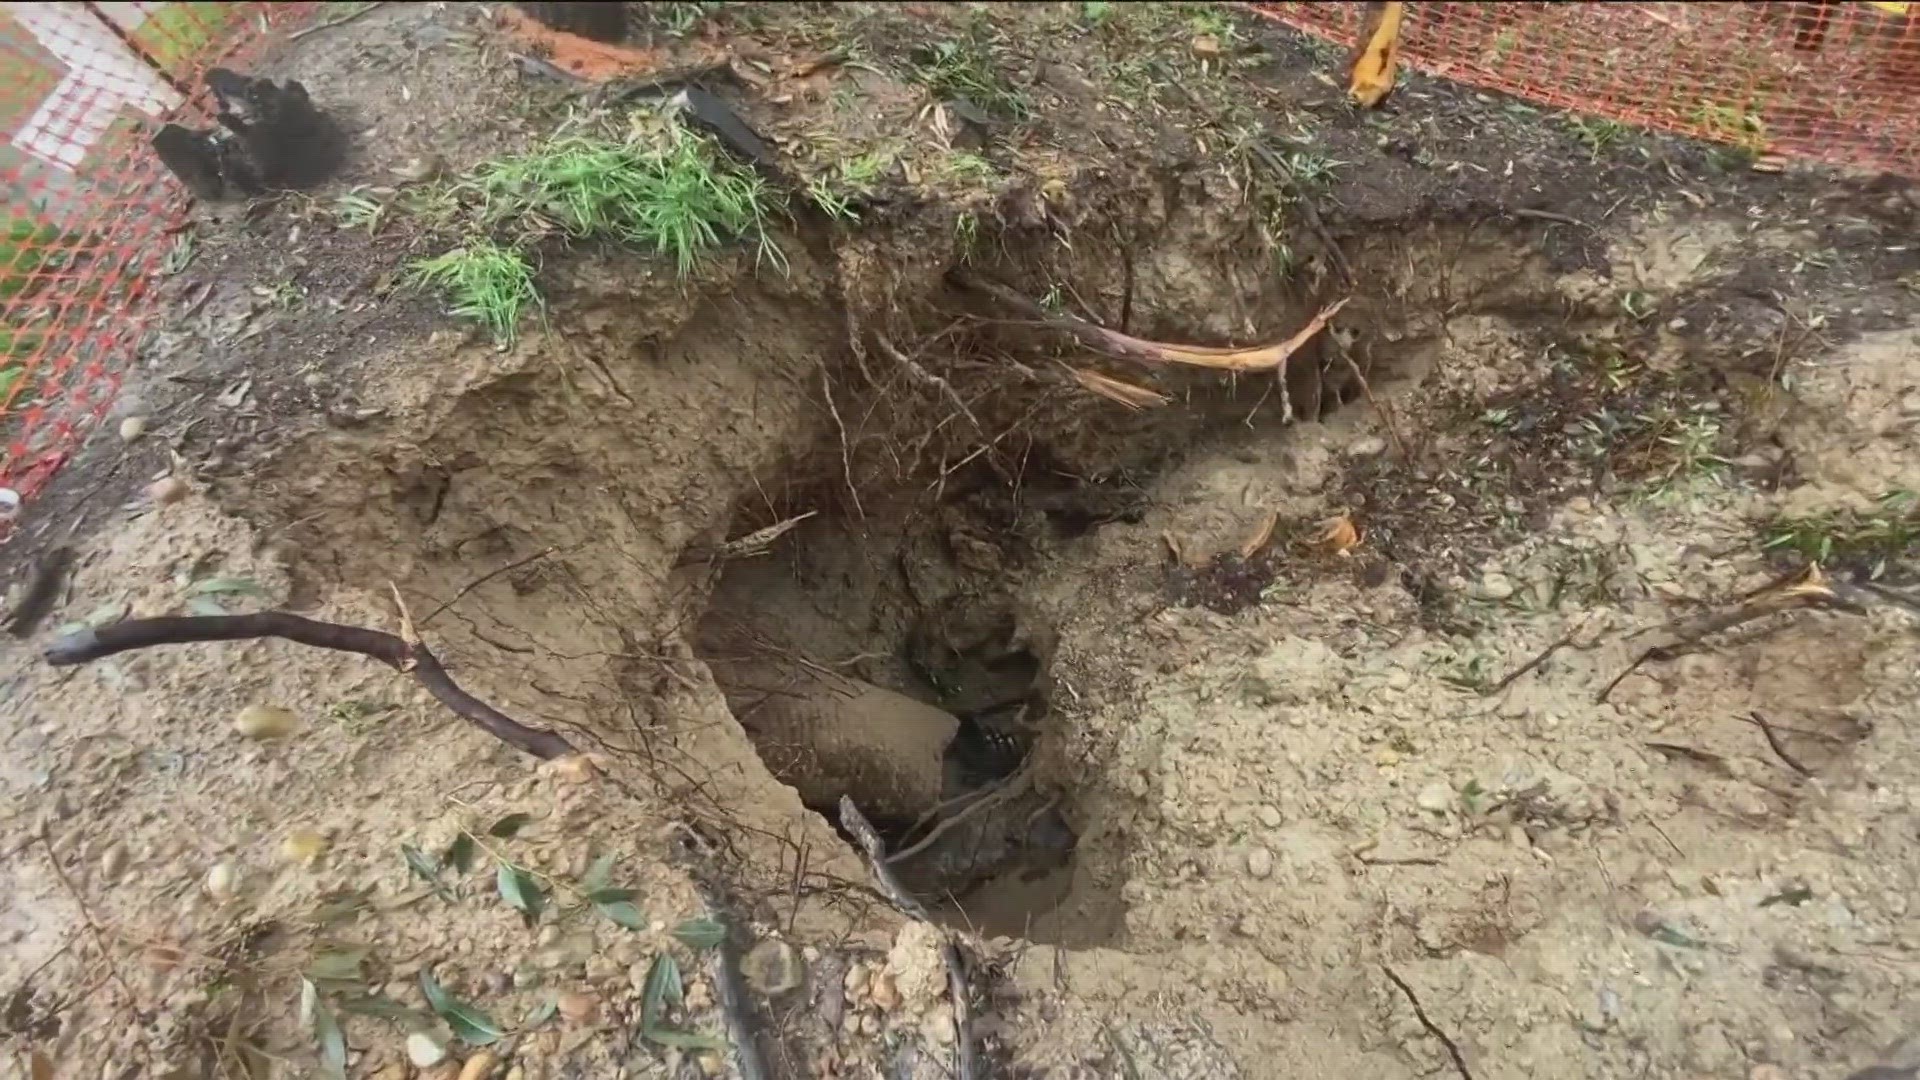 Recent storms have dumped substantial amounts of rain across San Diego, opening up new sinkholes and making an existing one even bigger.